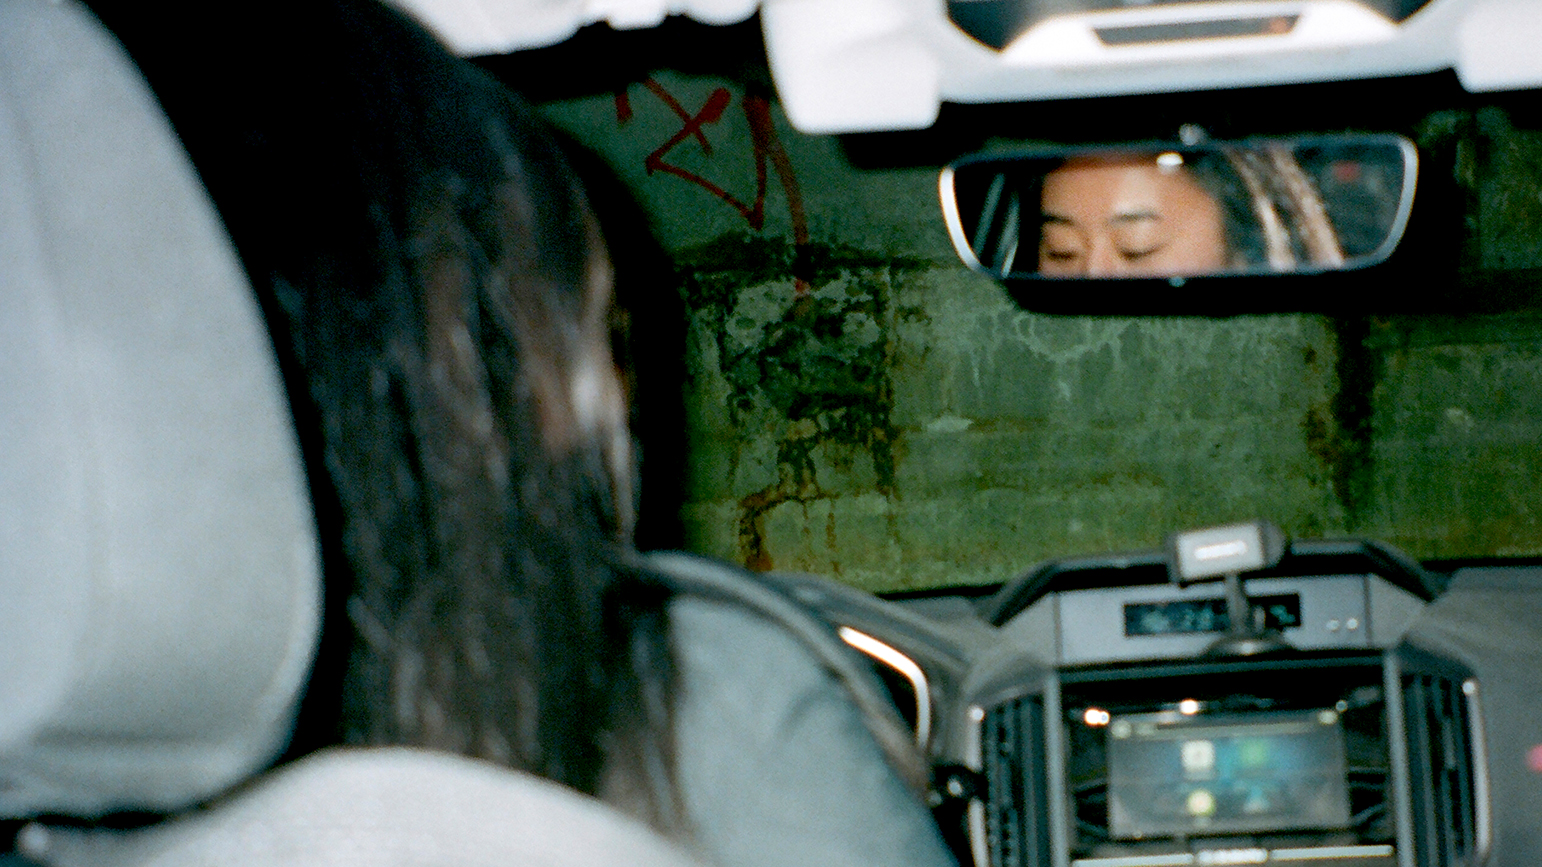 Photograph taken from the back seat of a car showing the reflection of the driver's eyes in the rear view mirror